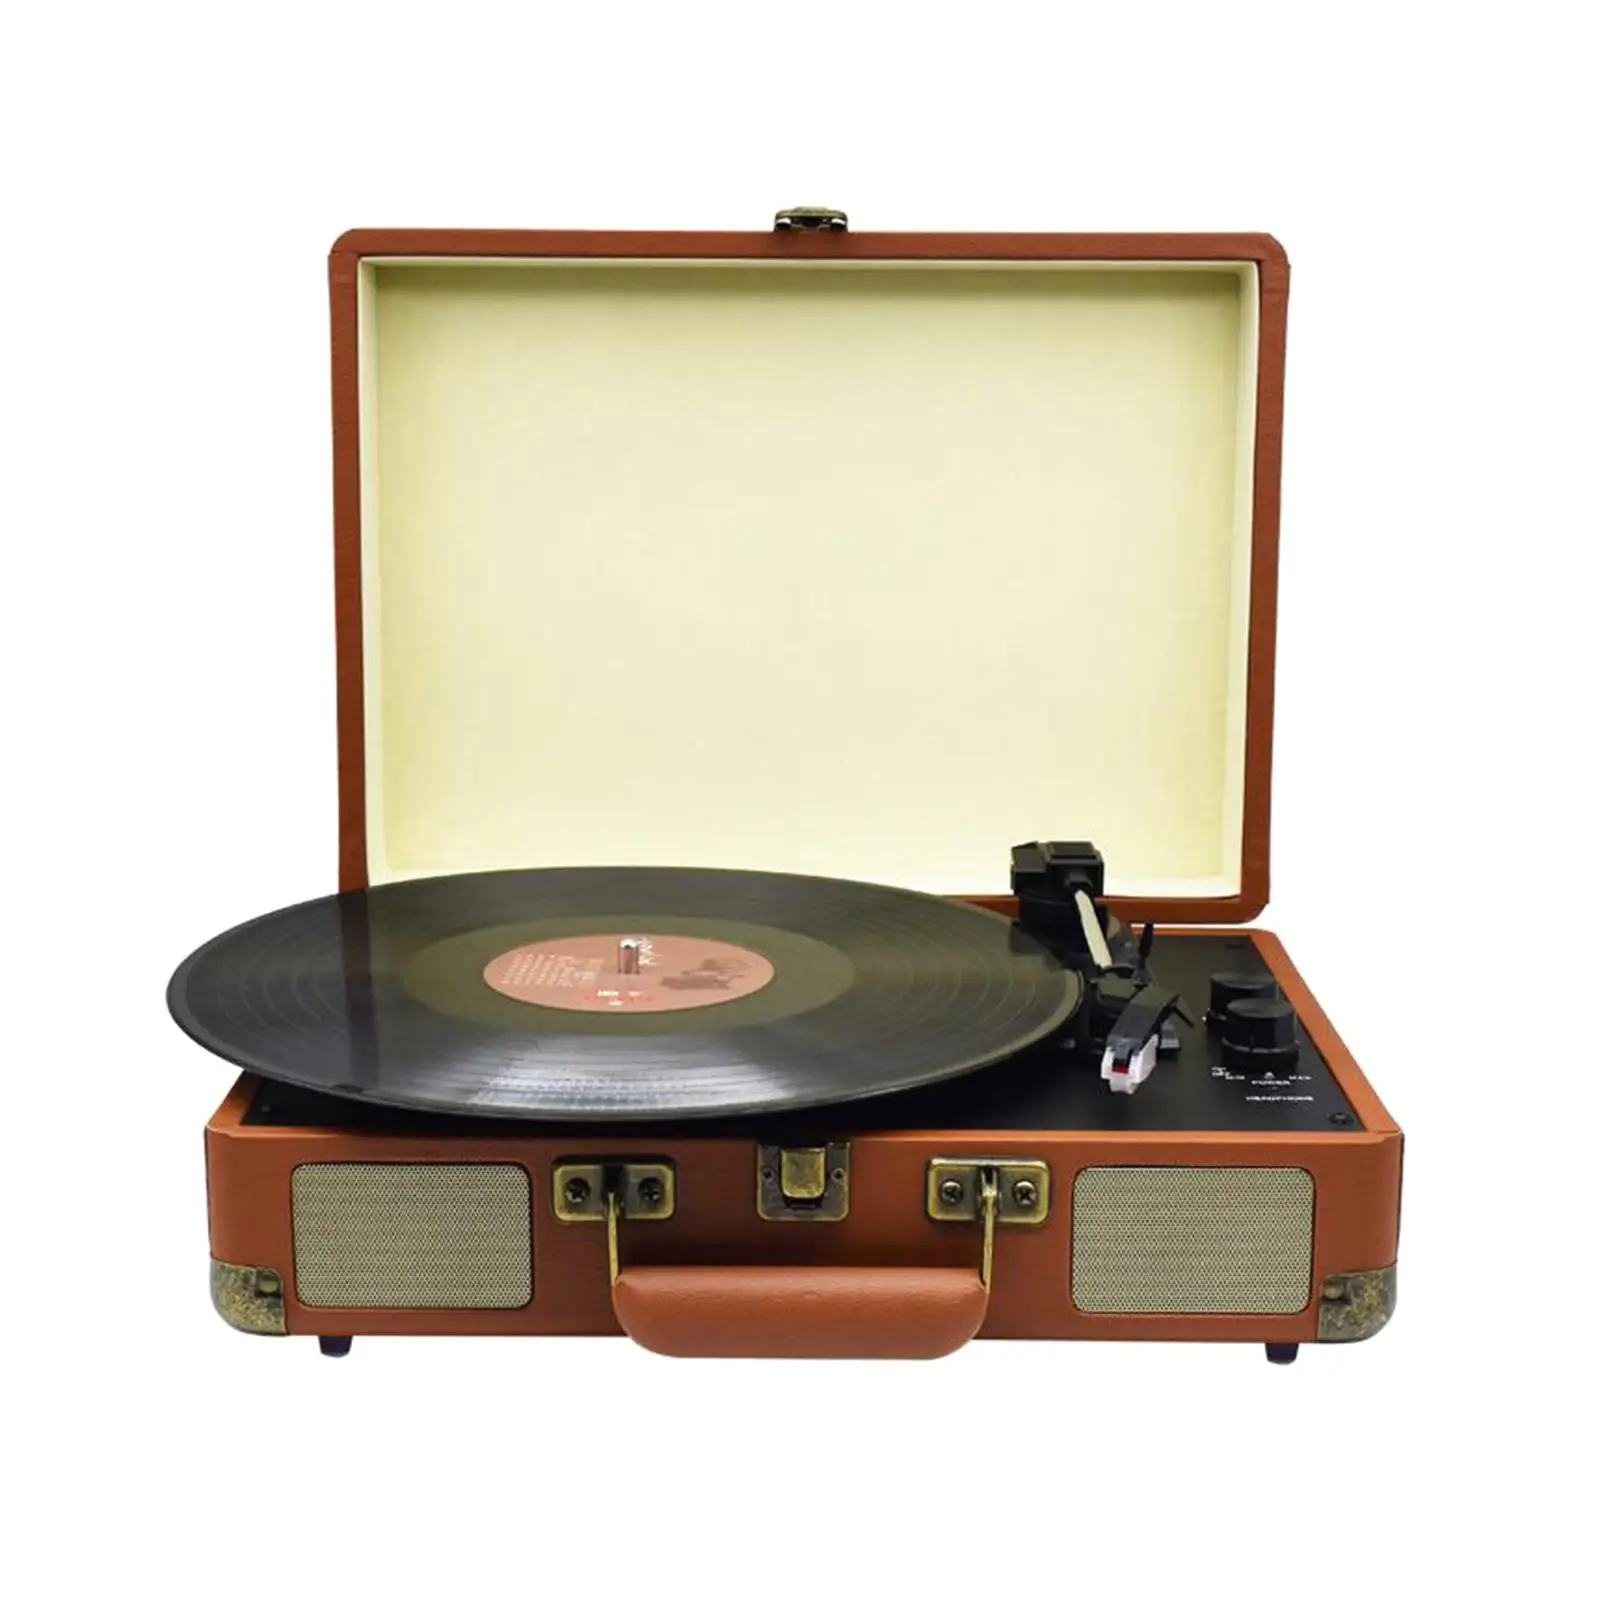 Vinyl Record Player CD Player 3 Speeds Portable Turntable Player Built in Speakers for Bar Entertainment Office Home Decoration